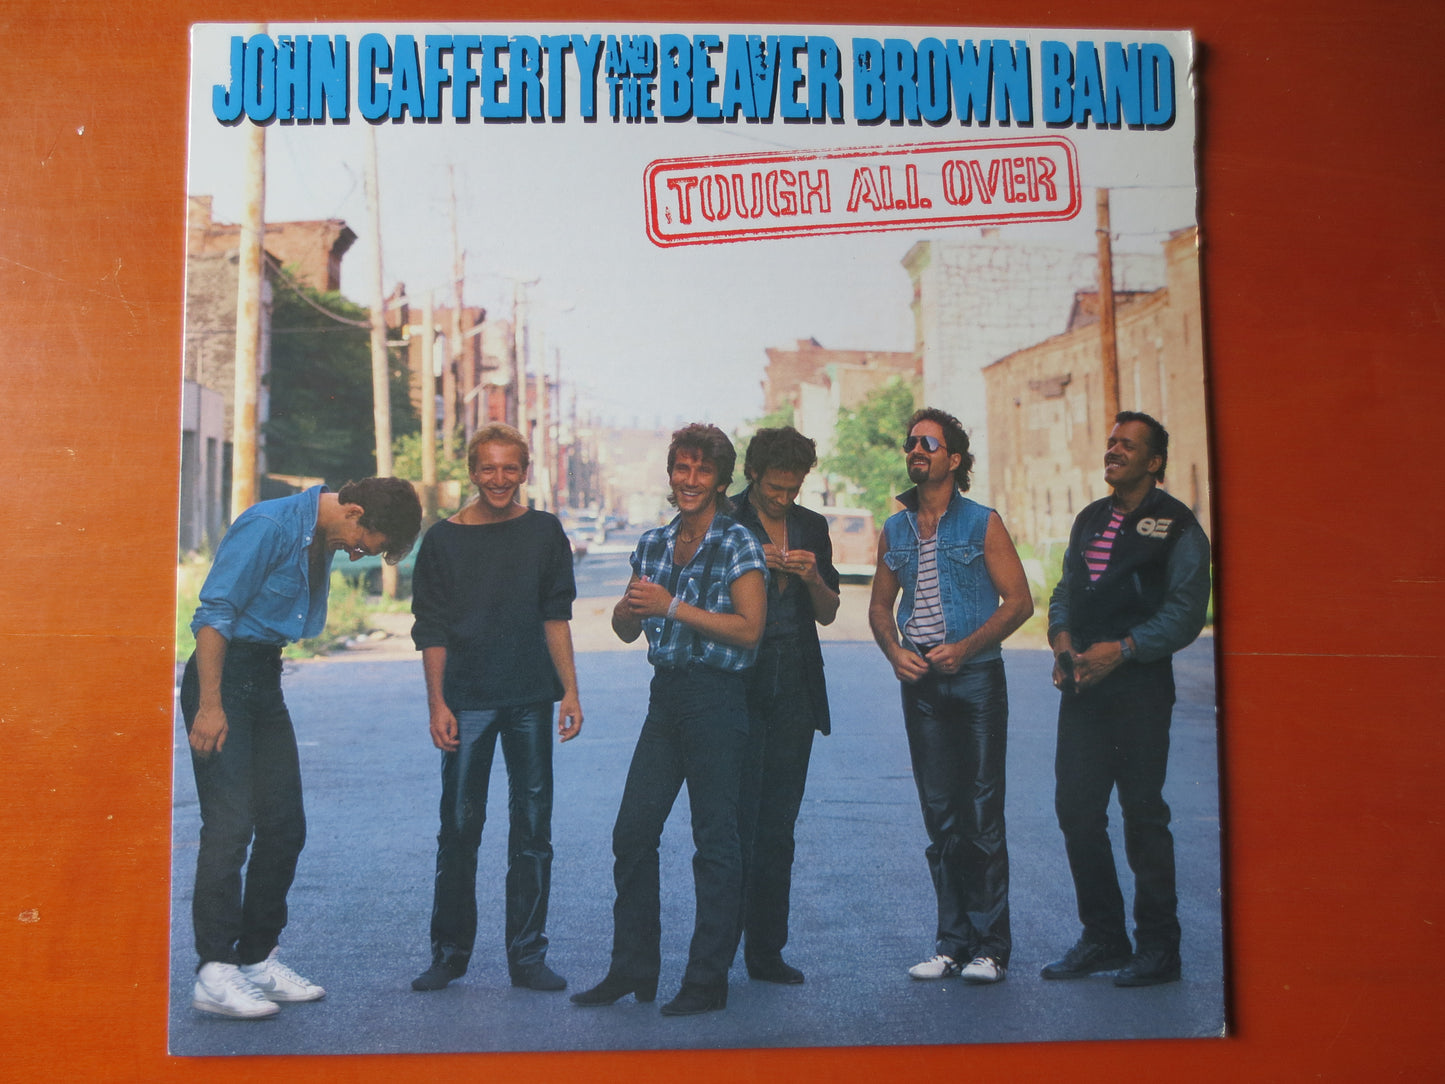 JOHN CAFFERTY, TOUGH All Over, Beaver Brown Band, Vintage Vinyl, Record Vinyl, Vinyl Record, Vinyl, Rock lps, 1985 Records